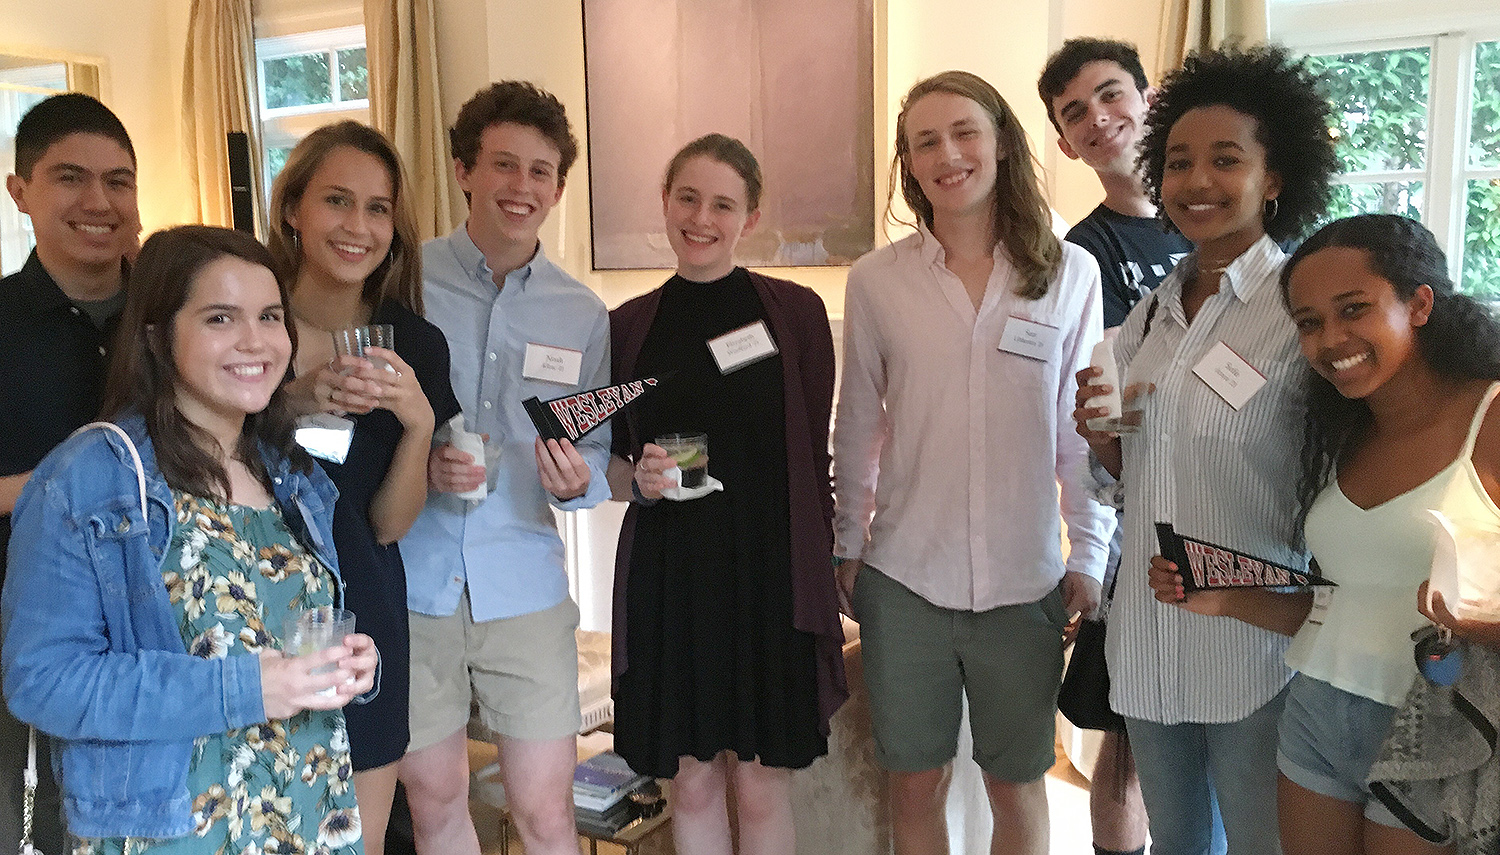 On July 17, a Summer Sendoff was held in Washington D.C. The event was hosted by Lisa Hook P’17, Peter Gillon P ’17 and Nick Springsteen ’17.